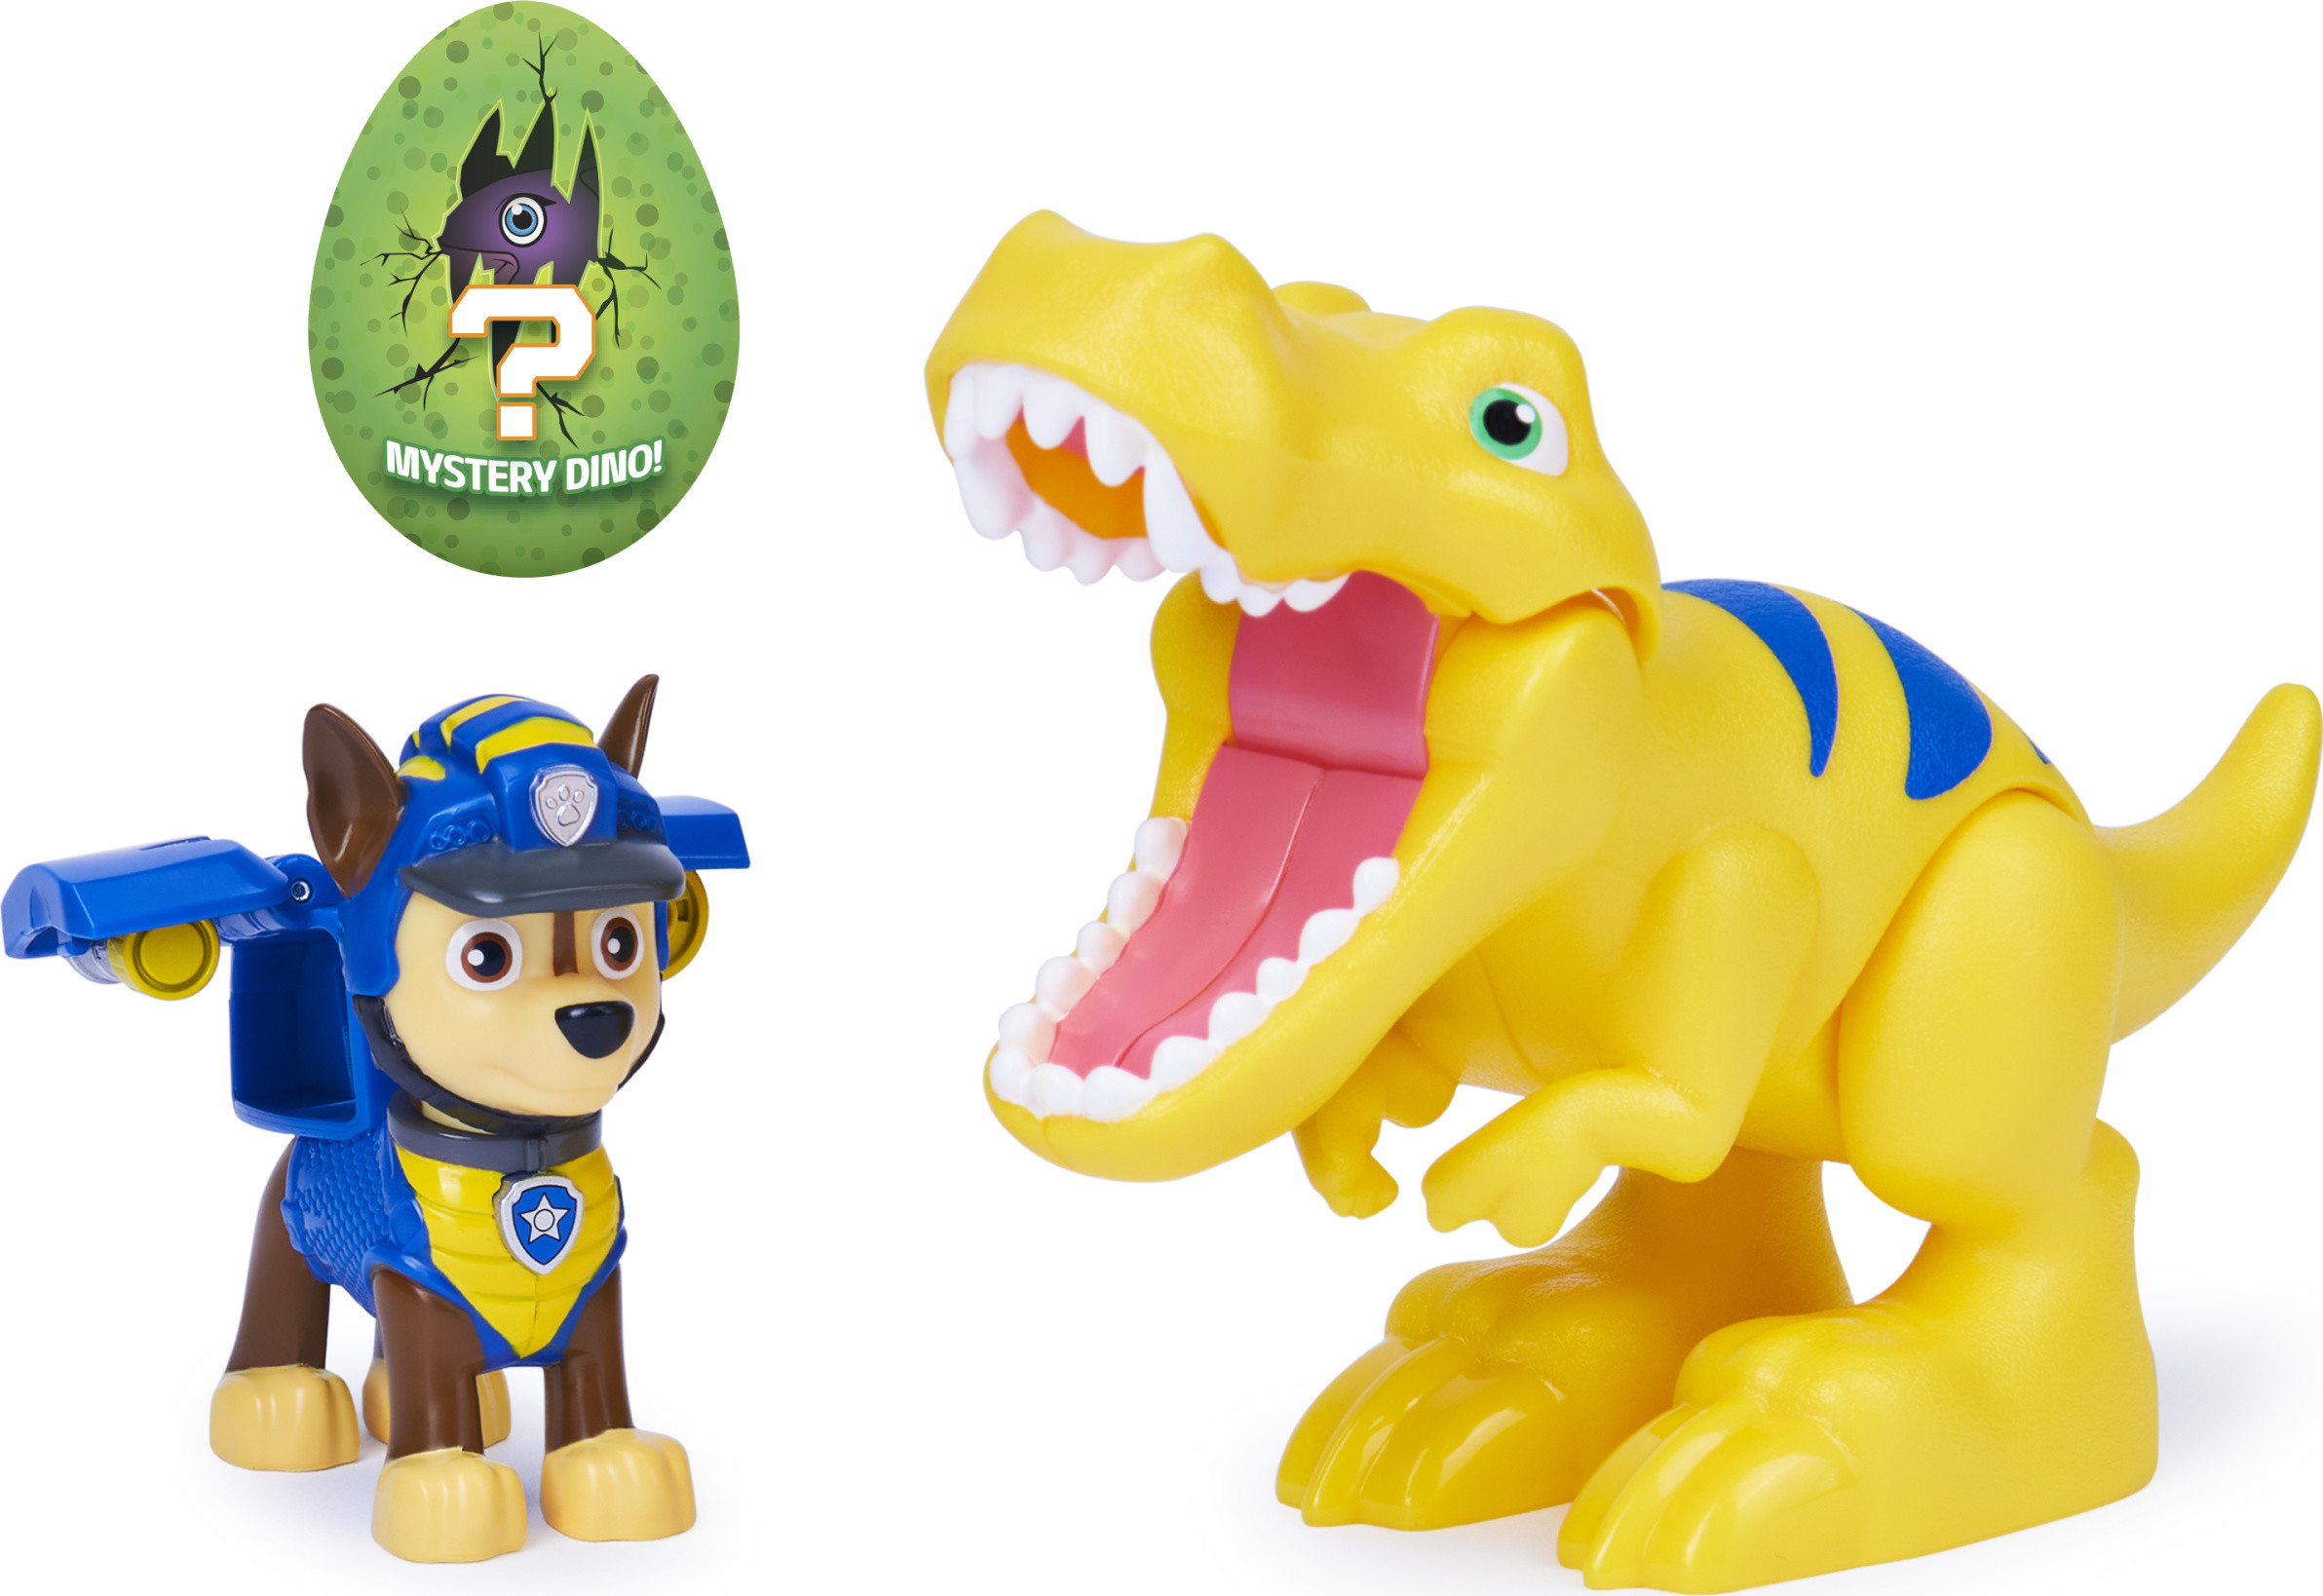 PAW Patrol, Dino Rescue Chase and Dinosaur Action Figure Set, for Kids Aged 3 and up - image 1 of 5